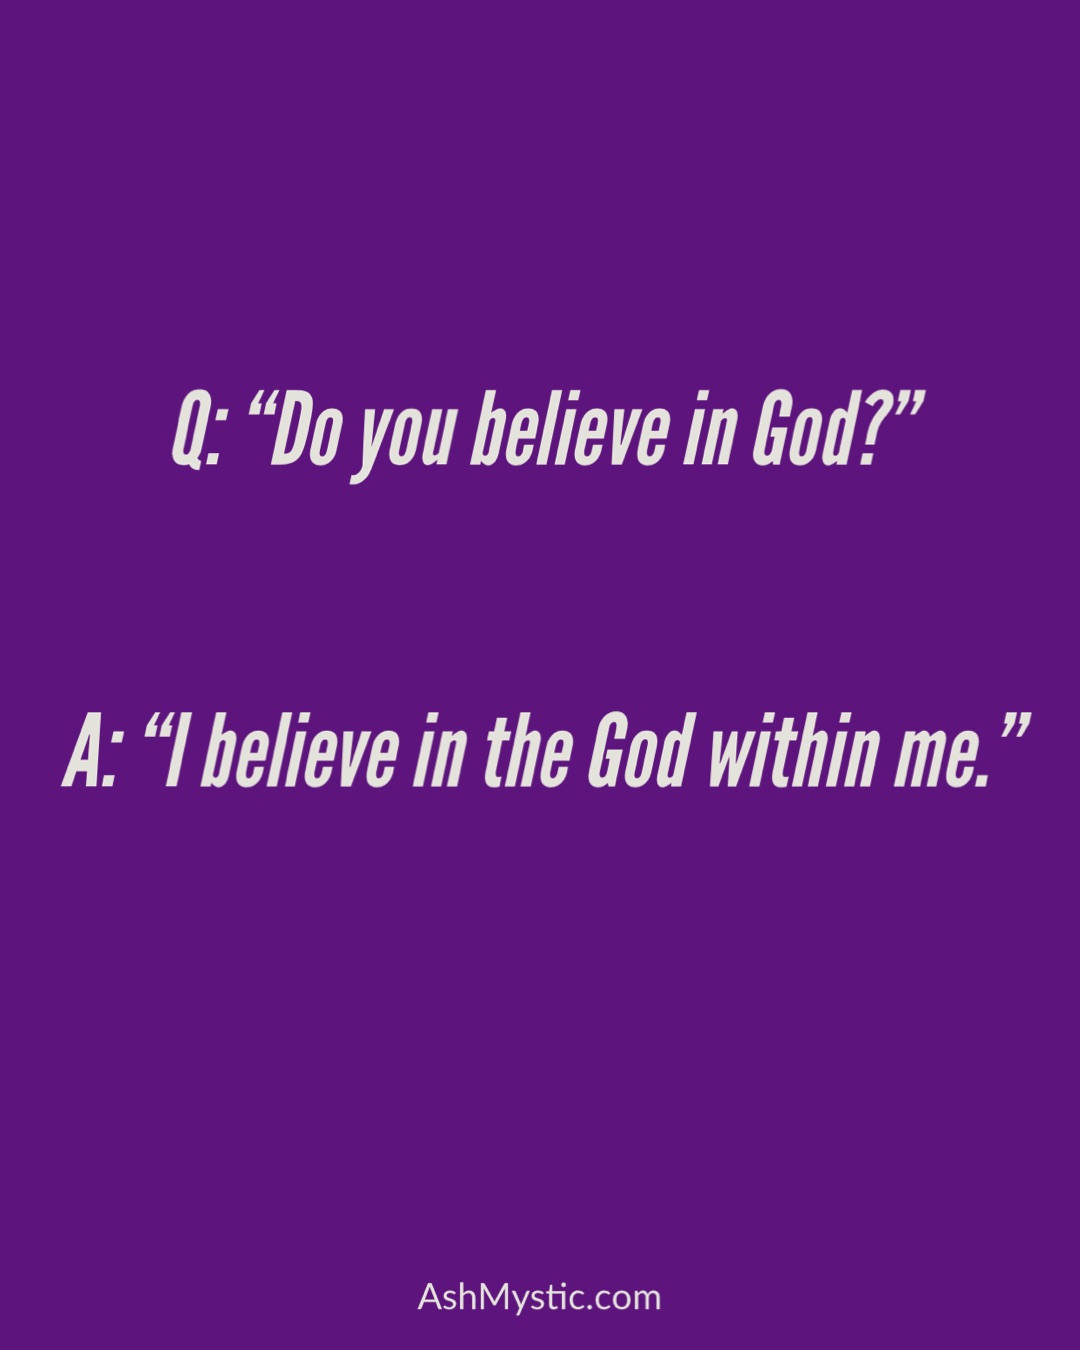 do you believe in god text image